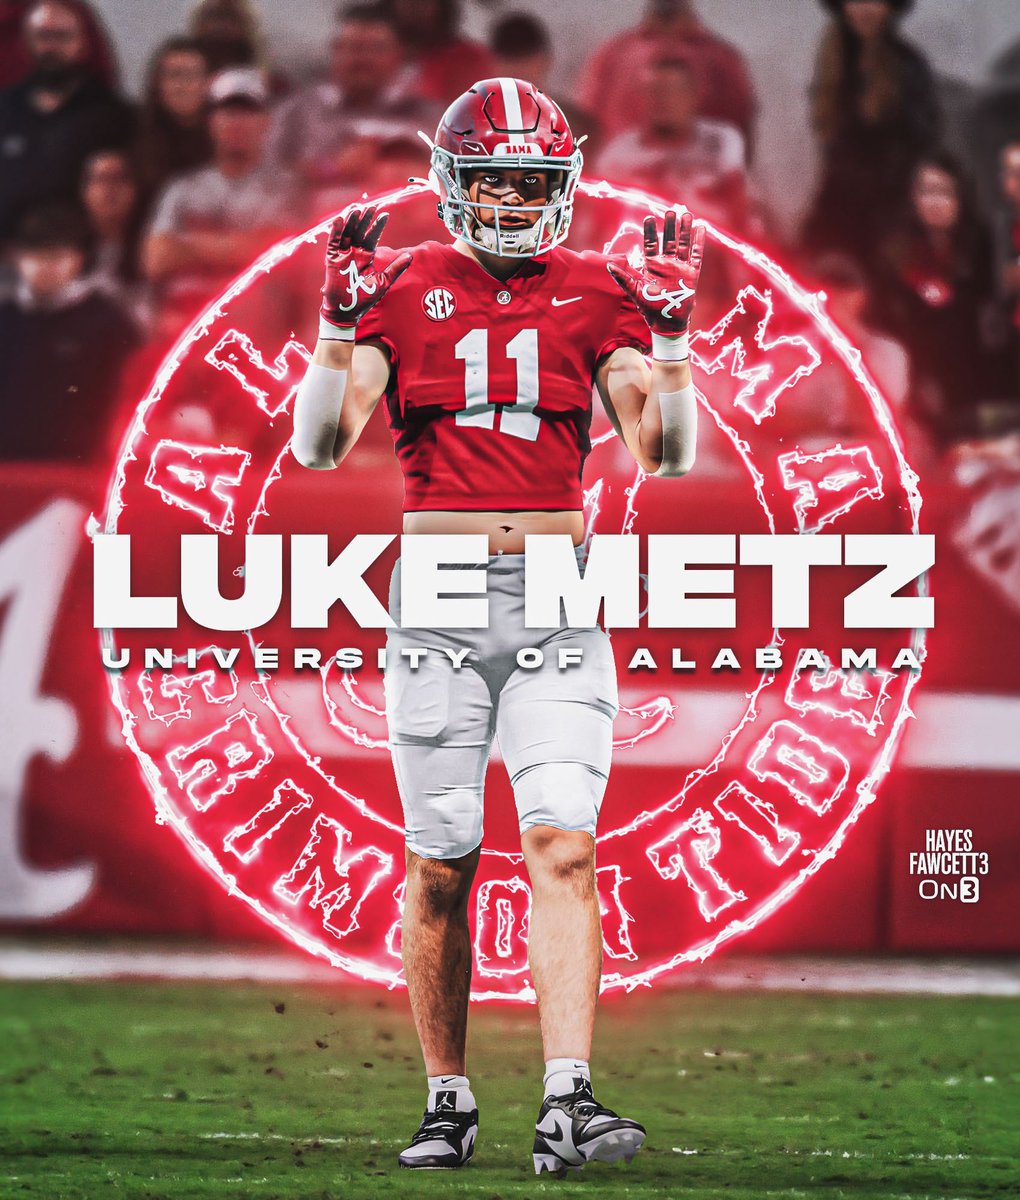 BREAKING: Class of 2025 LB Luke Metz has Committed to Alabama, he tells me for @on3recruits The 6’3 220 LB from Buford, GA chose the Crimson Tide over Ole Miss, LSU, & Michigan “ROLL TIDE ROLL🐘” on3.com/db/luke-metz-2…